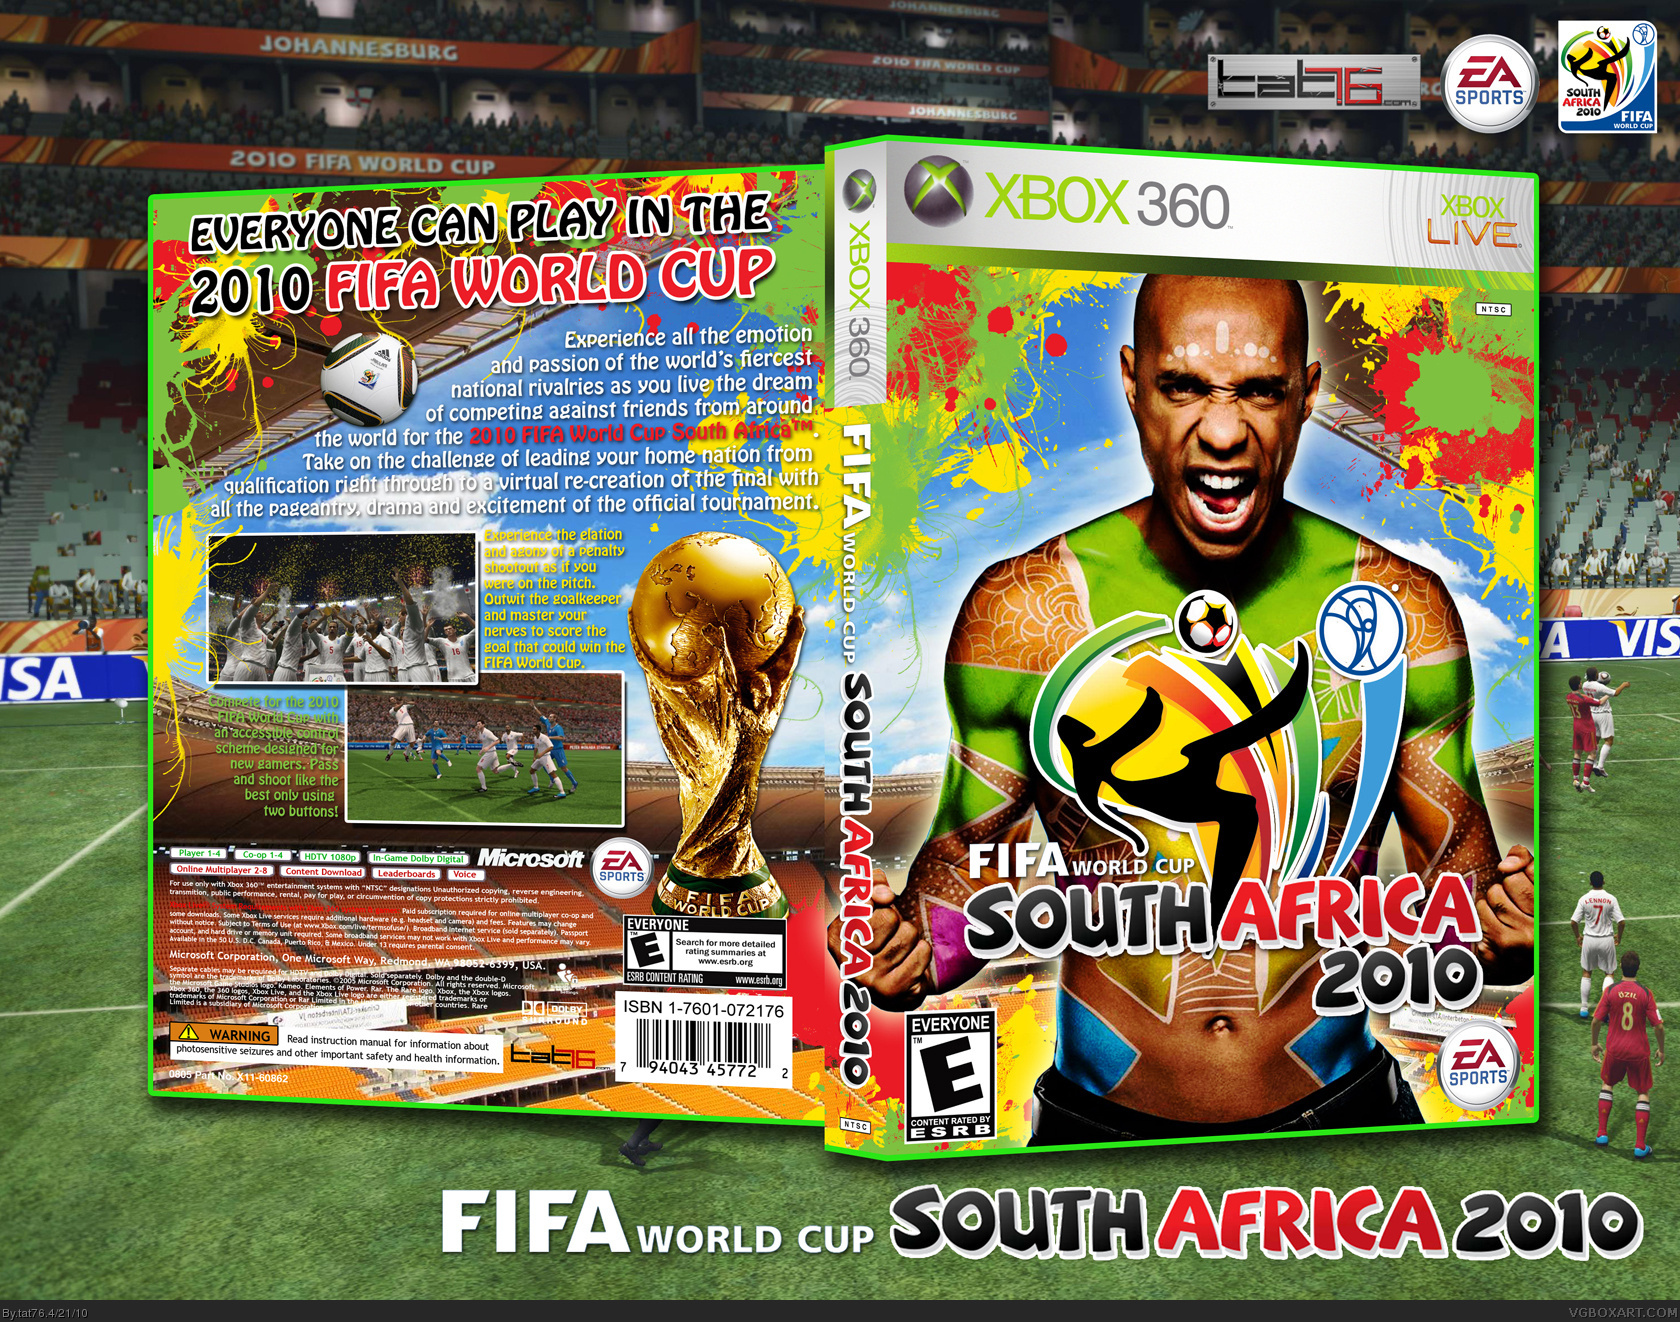 2010 FIFA World Cup South Africa box cover